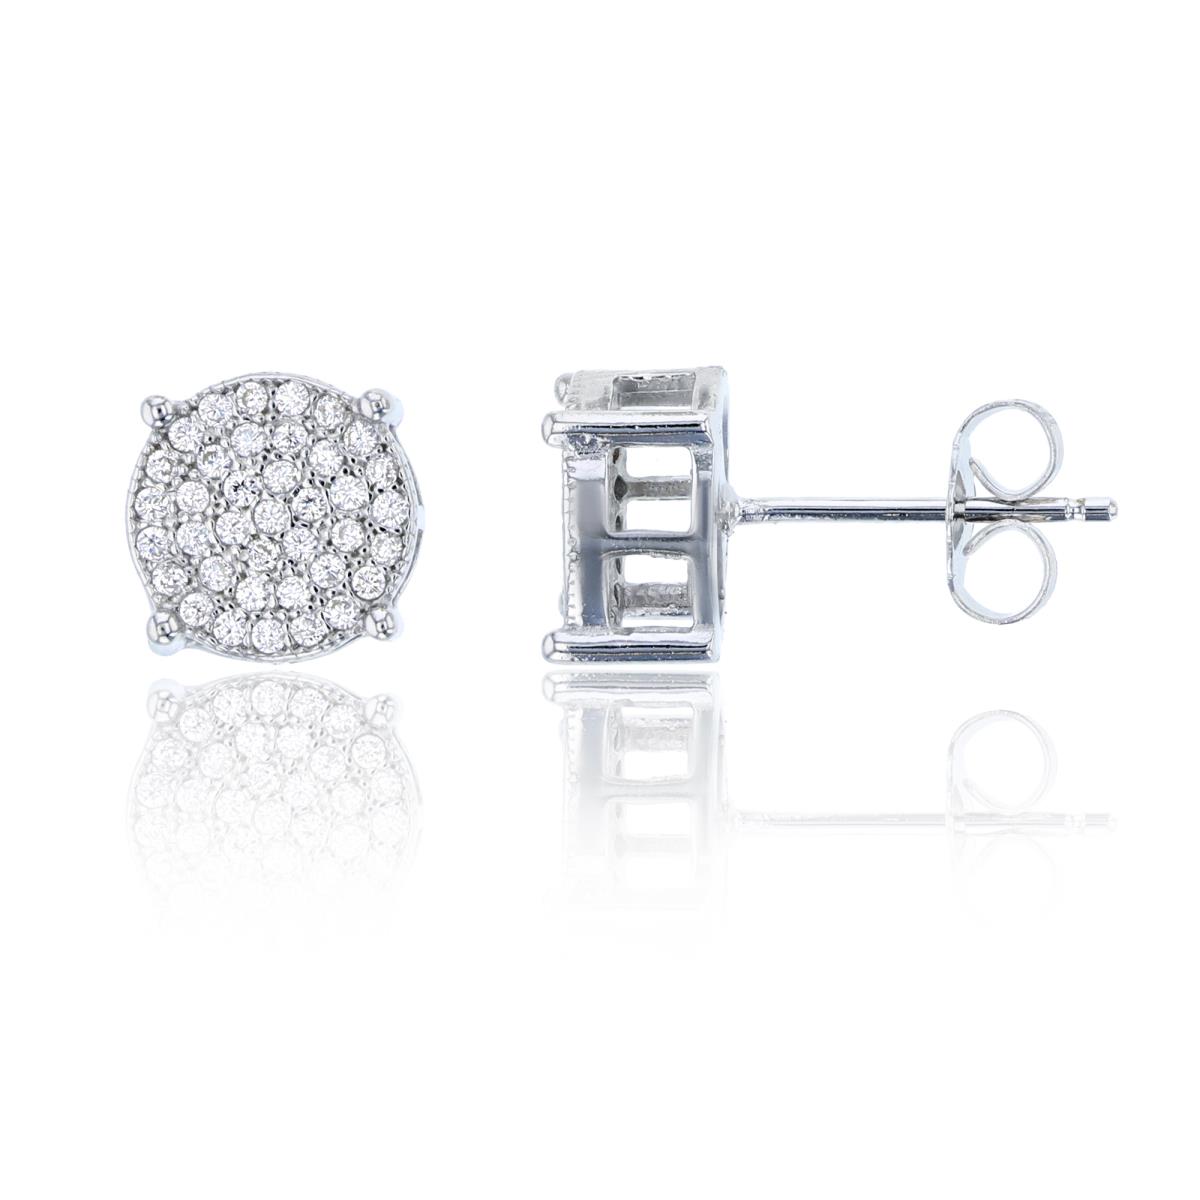 Sterling Silver 9.75mm Round Micropave Stud Earring